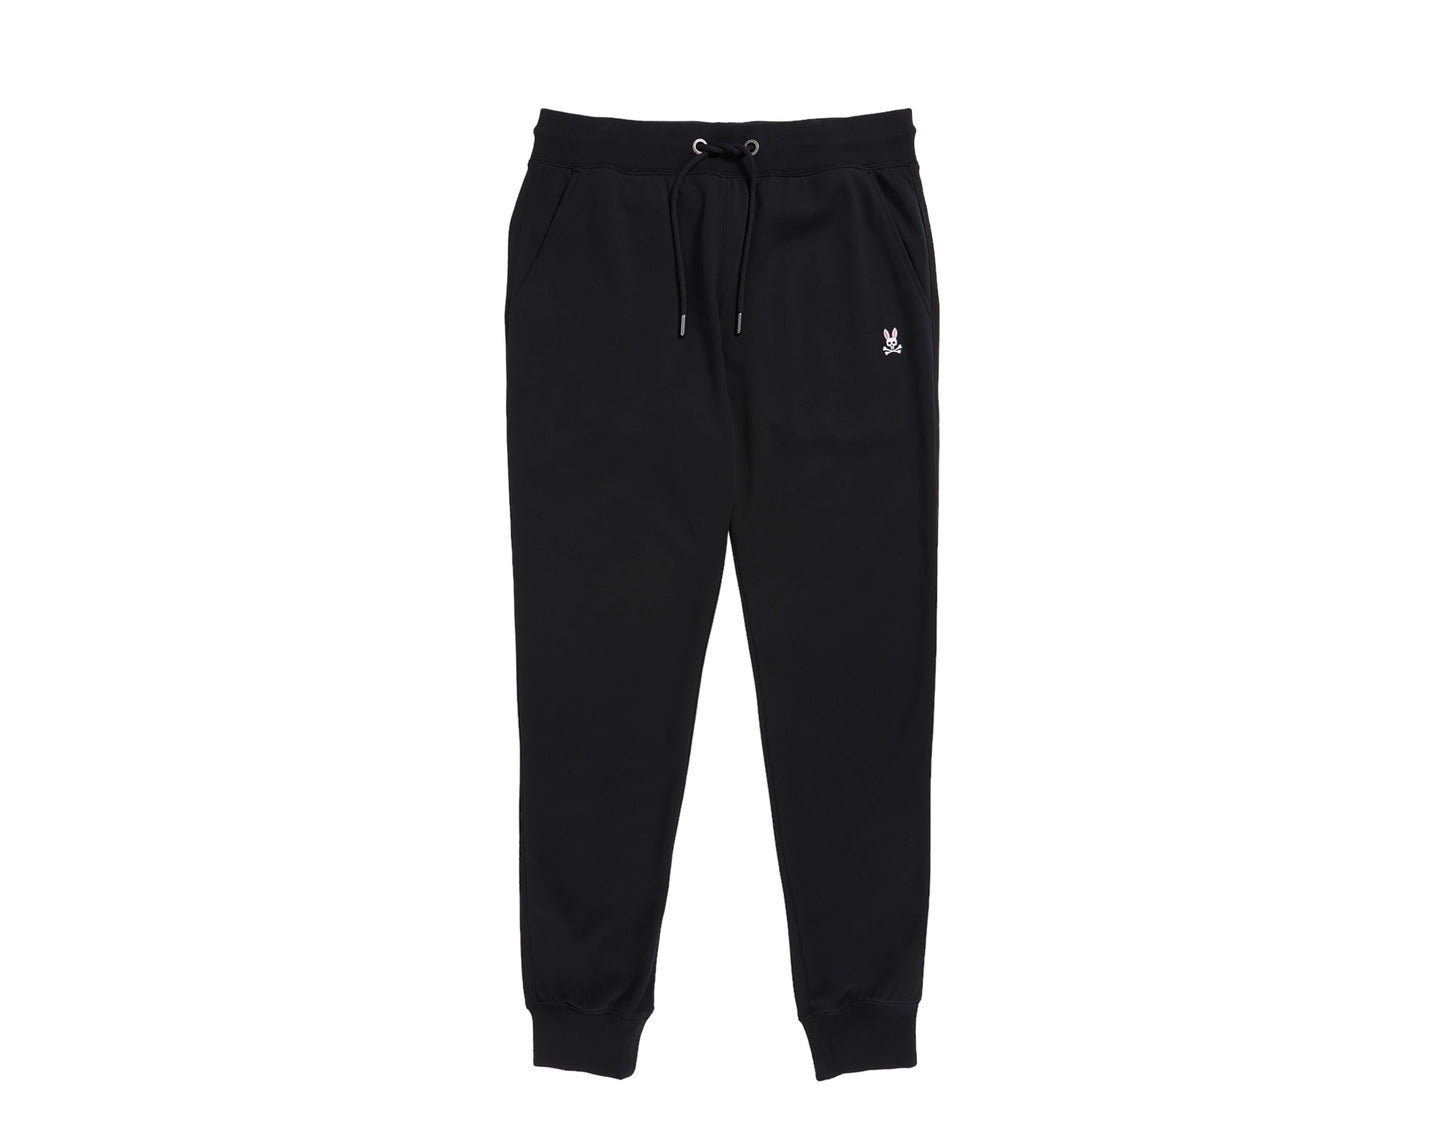 Psycho Bunny French Terry Knit Men's Sweatpants – NYCMode